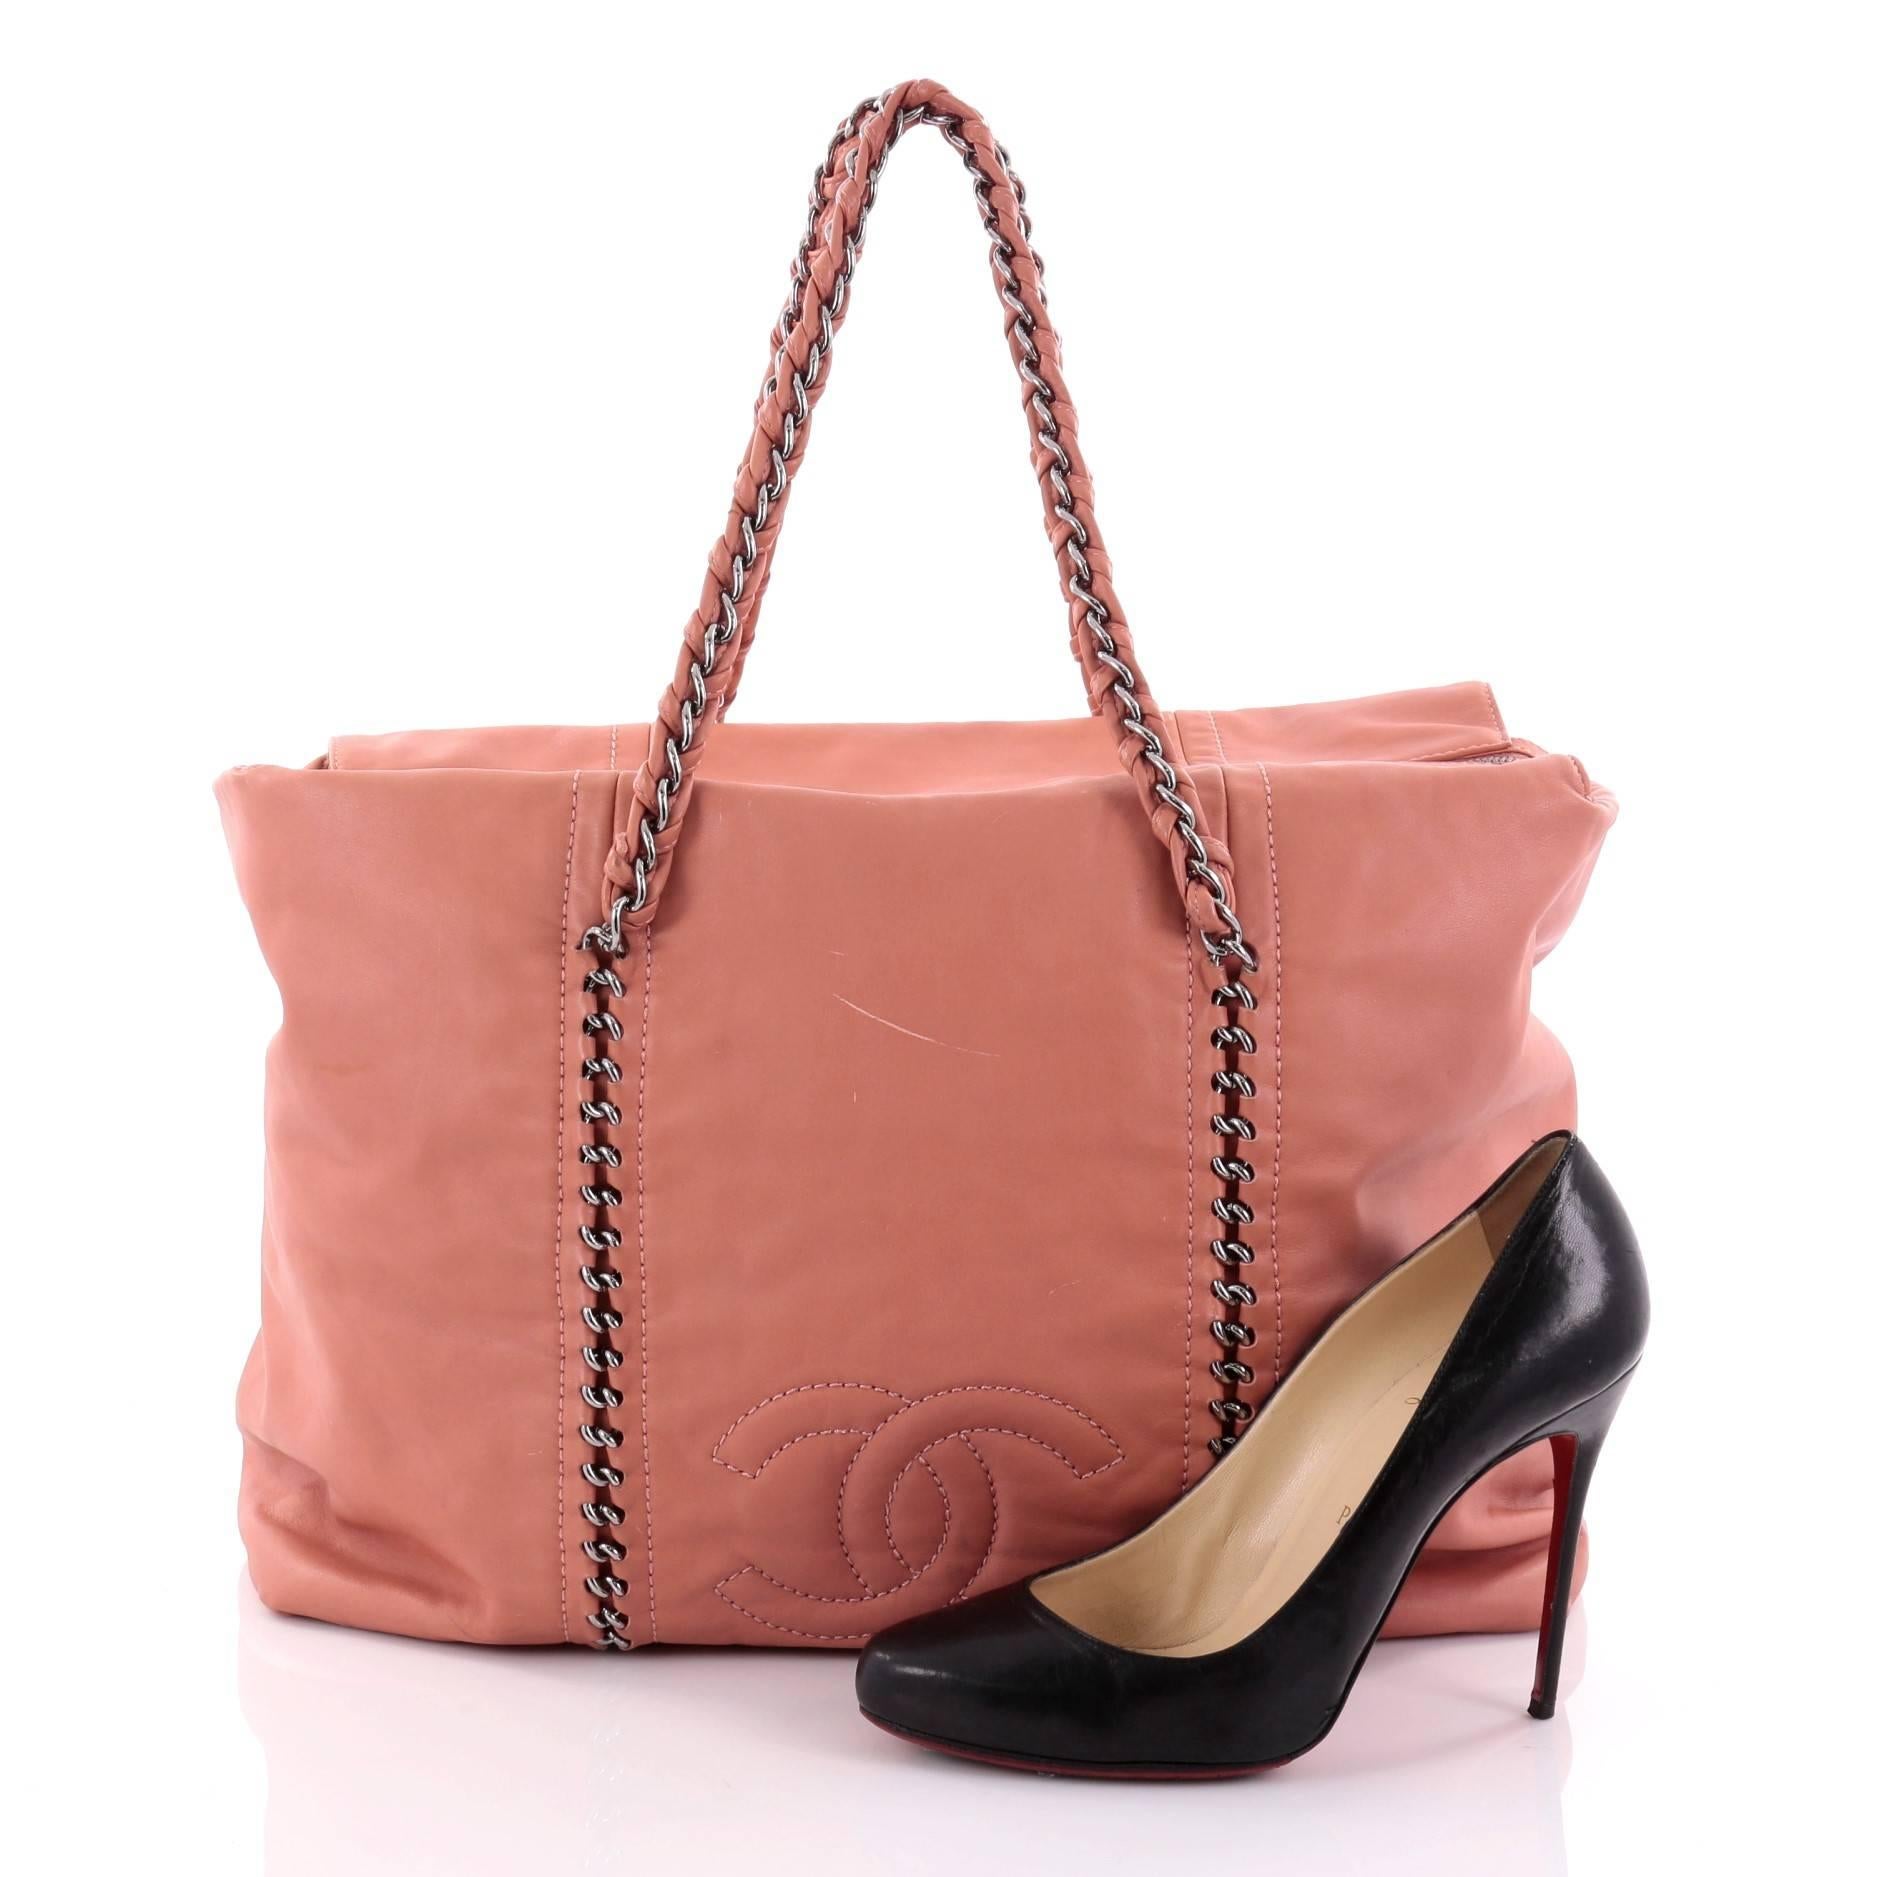 This authentic Chanel Luxe Ligne ZIp Top Tote Calfskin Large is perfect for an on-the-go fashionista. Constructed from dusty rose calfskin leather, this tote features braided woven leather chain straps, stitched chain details with Chanel CC logo